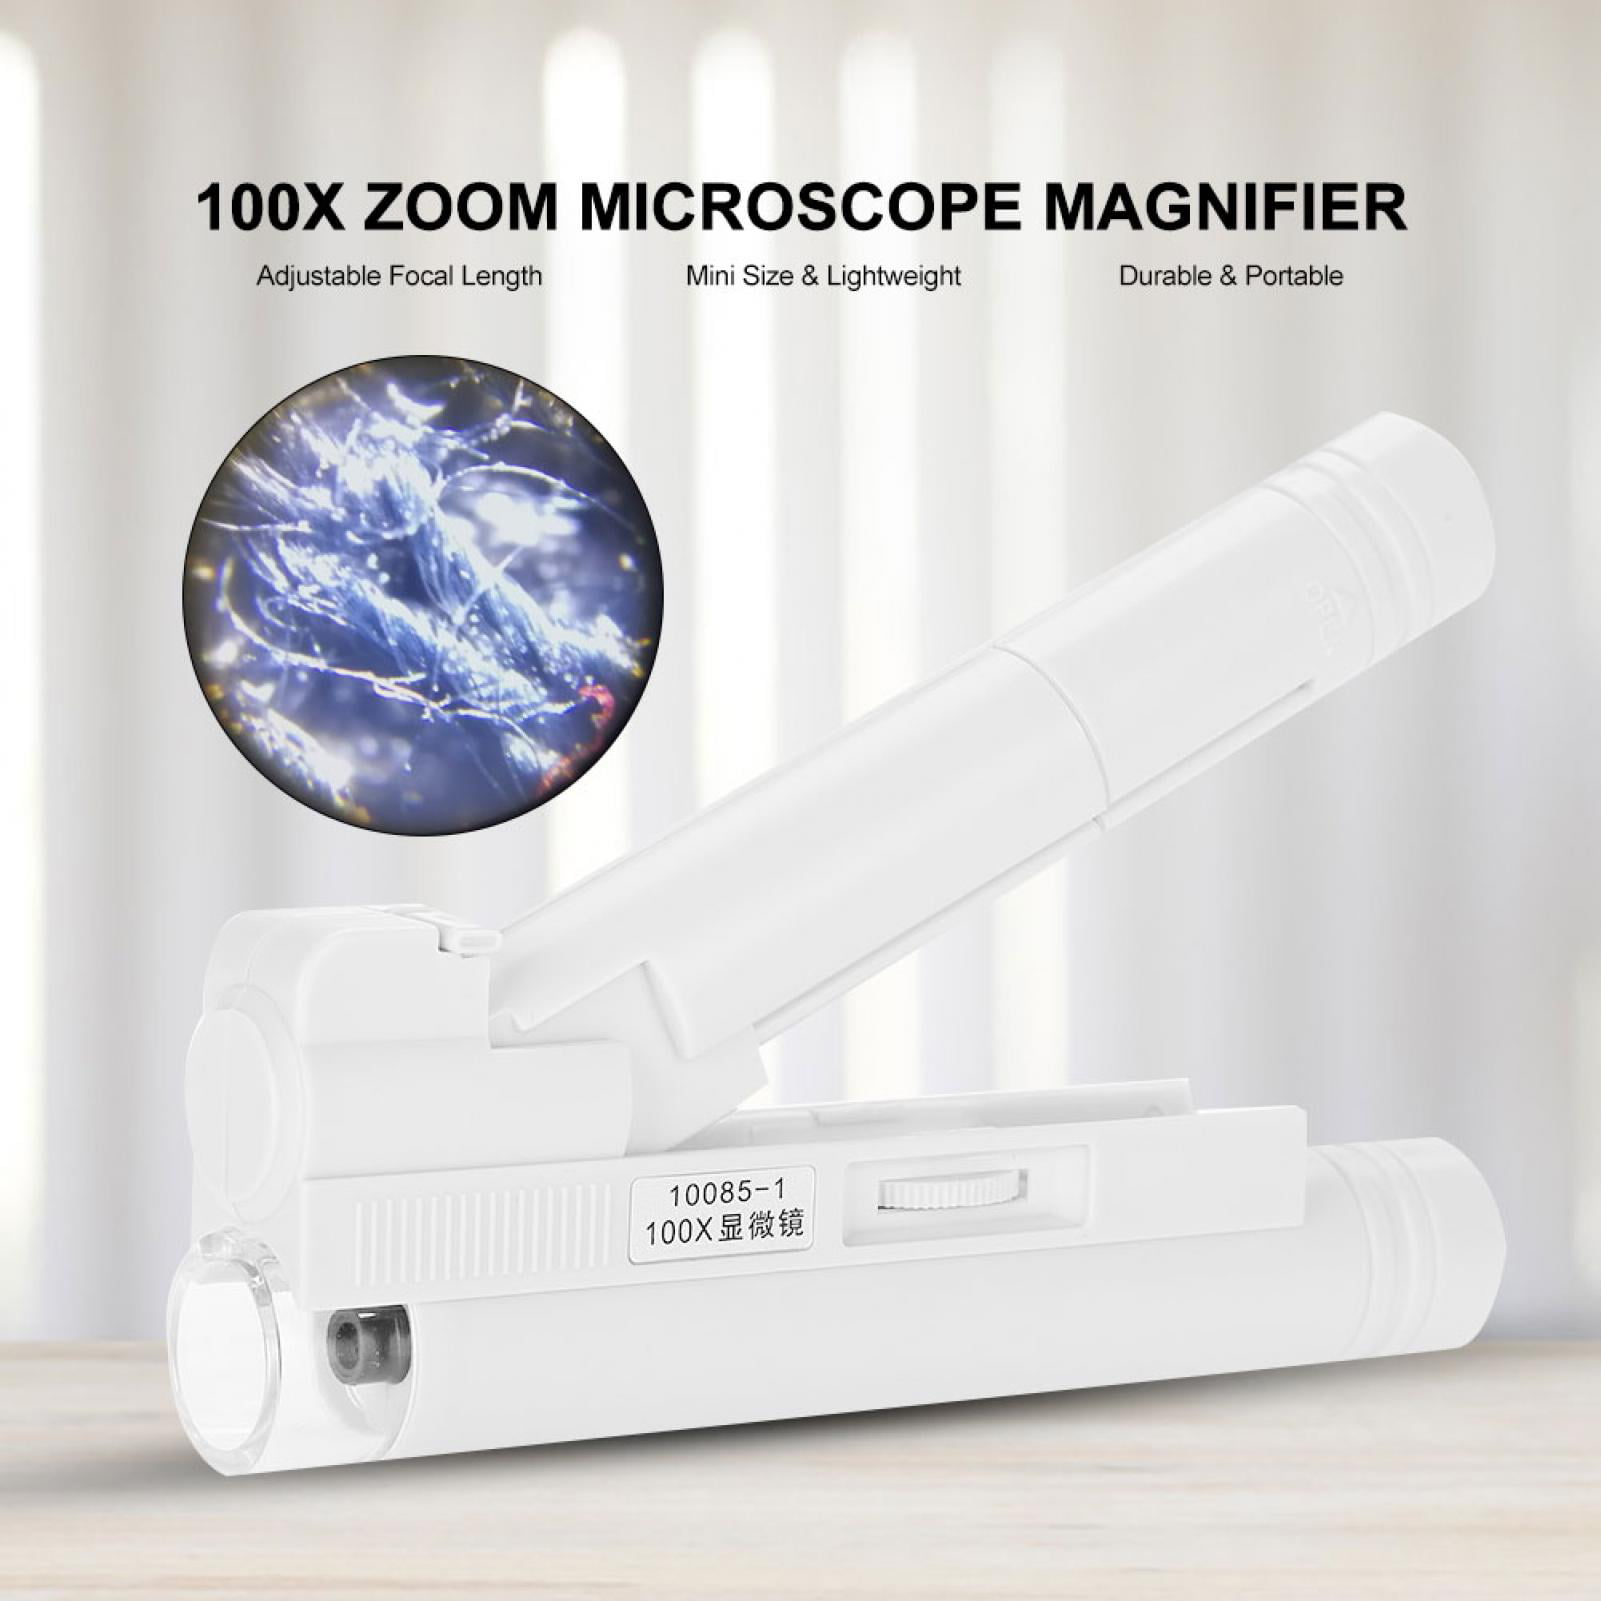 Domqga Magnifier with LED Light,100X Zoom Microscope Double Tube Jewelry  Magnifier Pocket Magnifying Glass with LED Light, Jewelry Magnifier